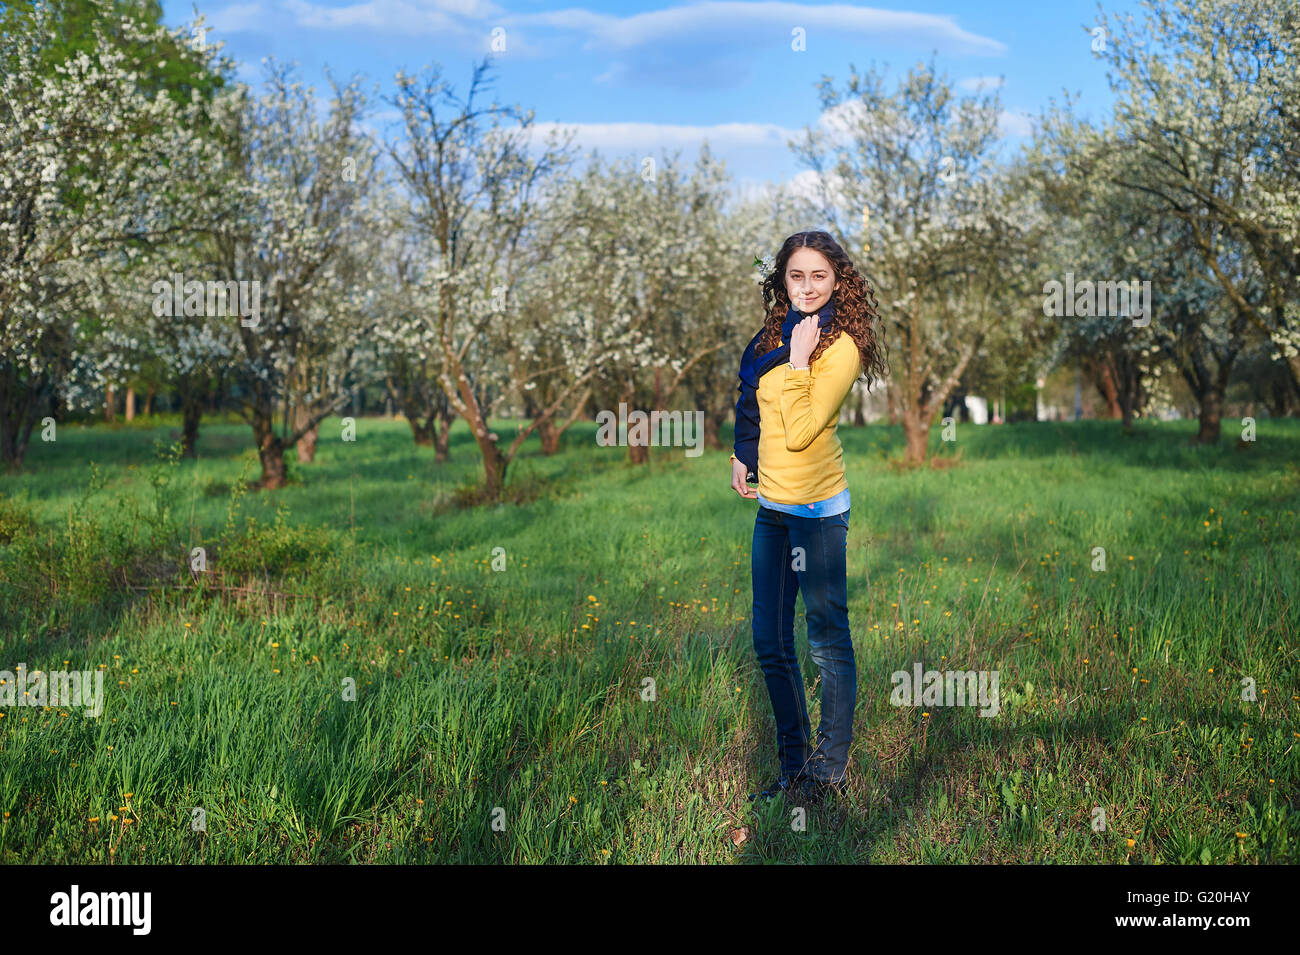 beautiful young woman walking in a blossoming spring garden Stock Photo